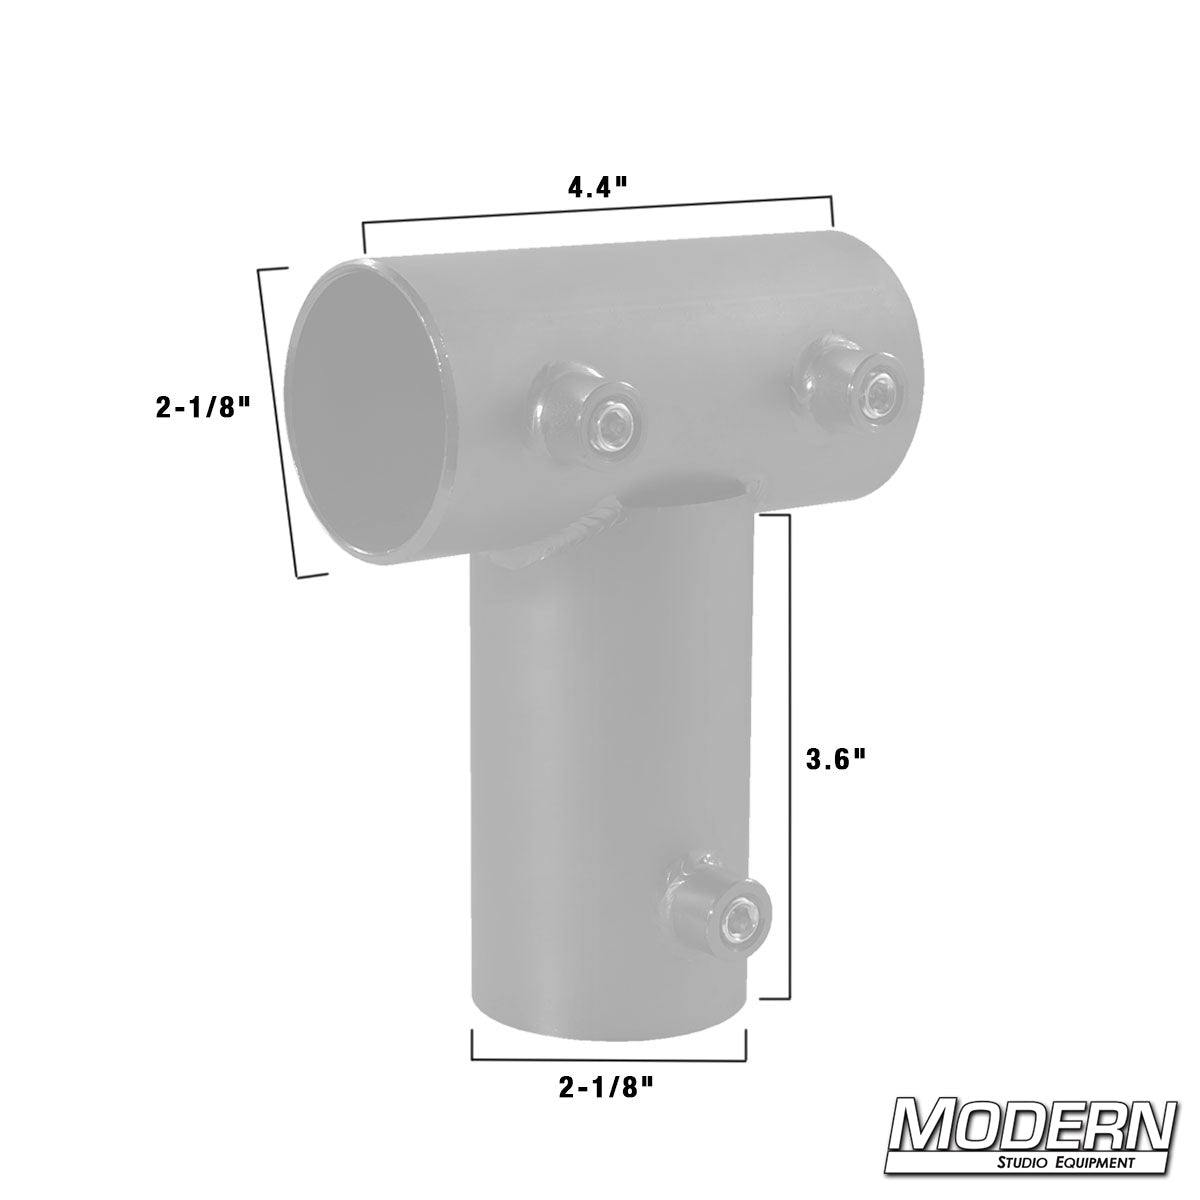 Pipe Tee Receiver for 1-1/2" Speed-Rail®